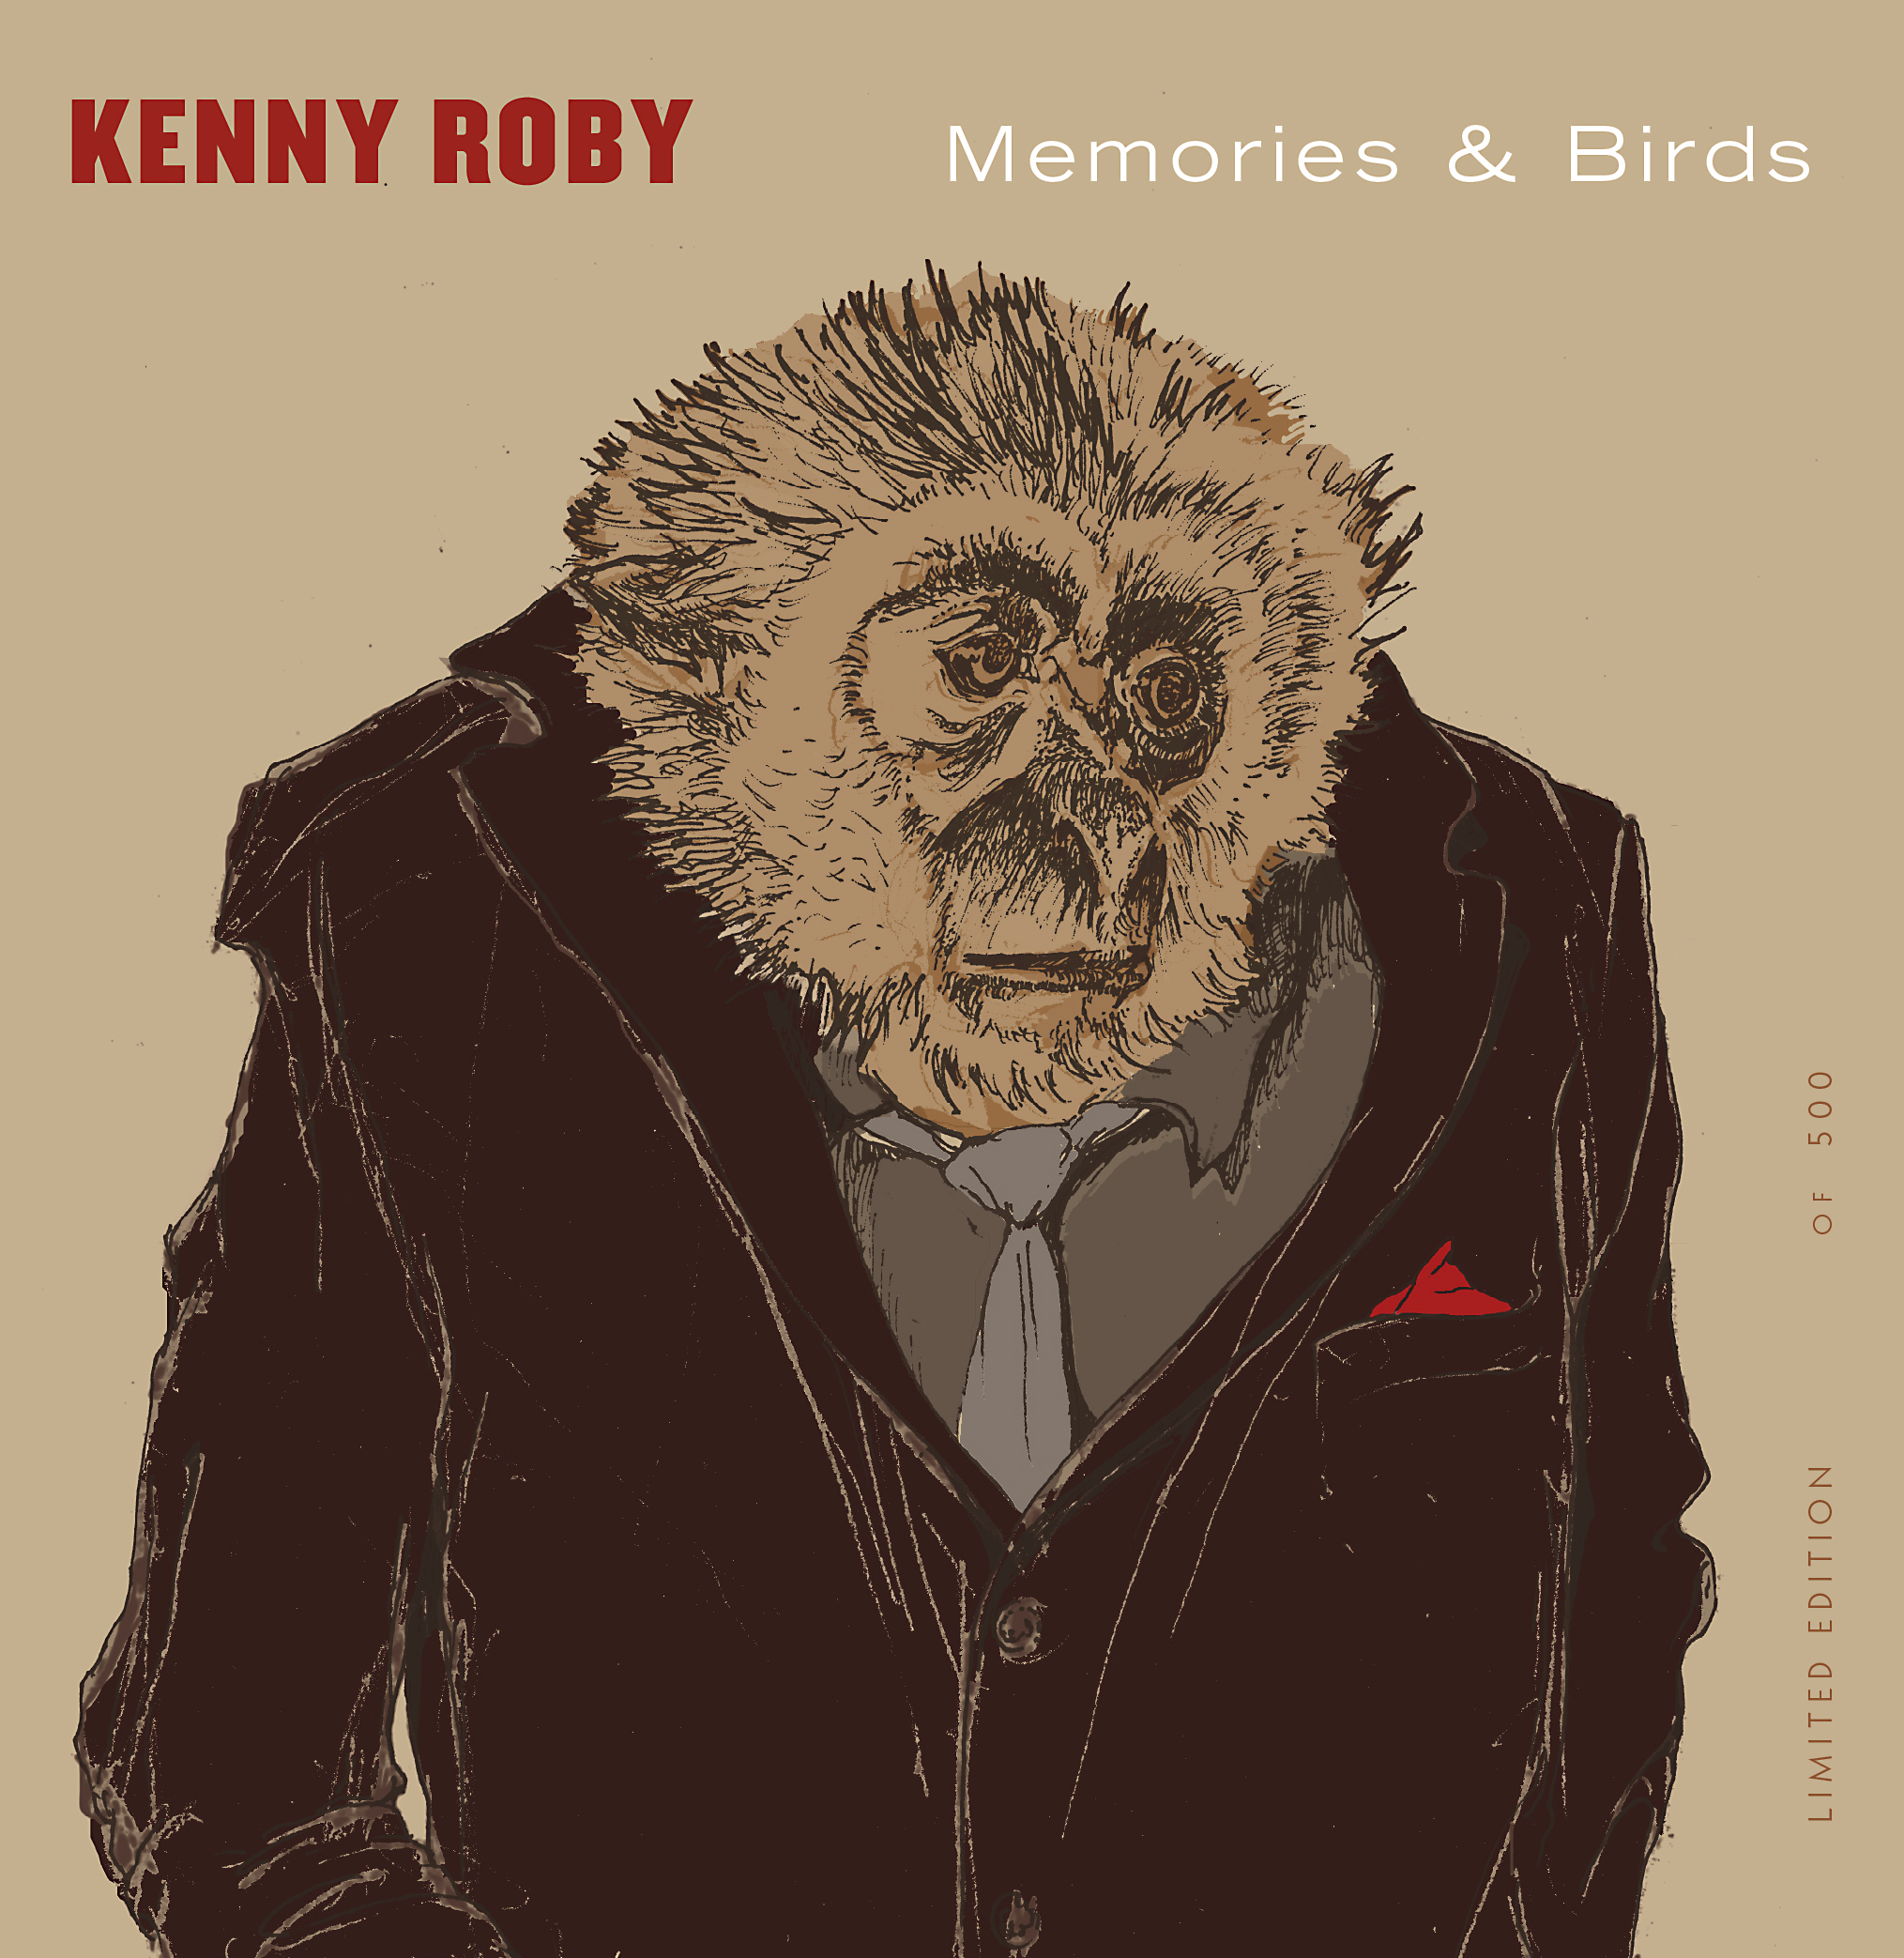  CD front cover. Singer as show monkey. Drawing of Mr. Gibbon as lounge singer by Jason Seale.   